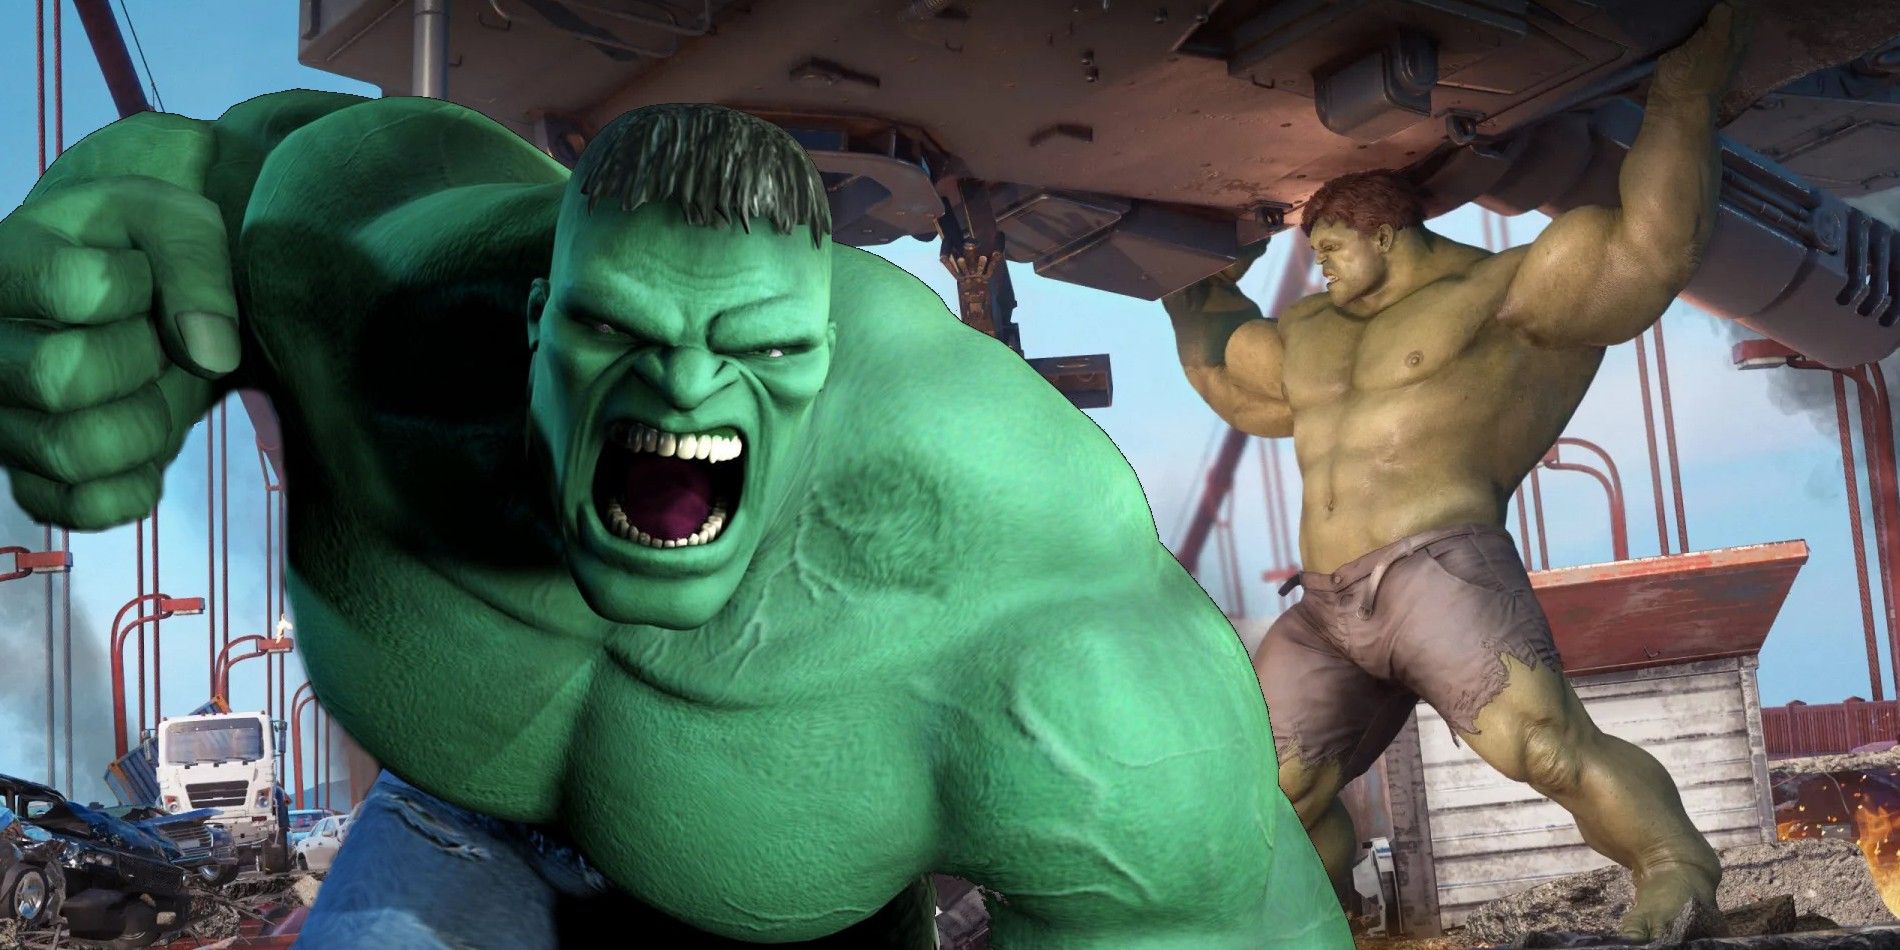 Hulk Ultimate Destruction has become outdated, but a modern successor could show off Hulk's power with new destruction physics.